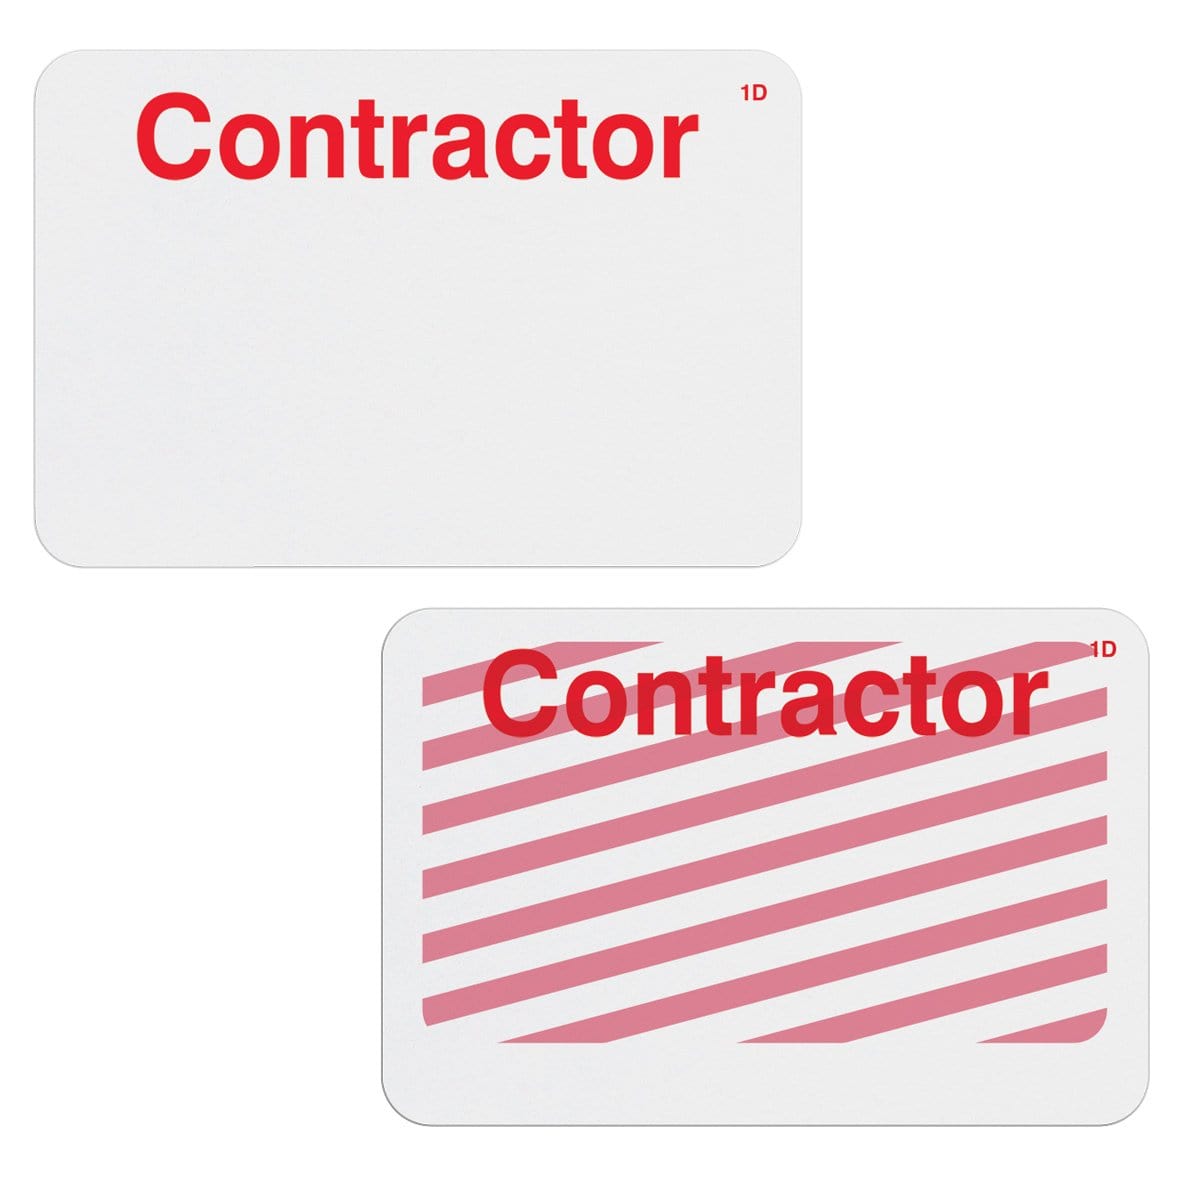 Contractor Frontpart Preprinted One Day Self Expiring Badges - Box of 1,000 (P/N T610X) T6105